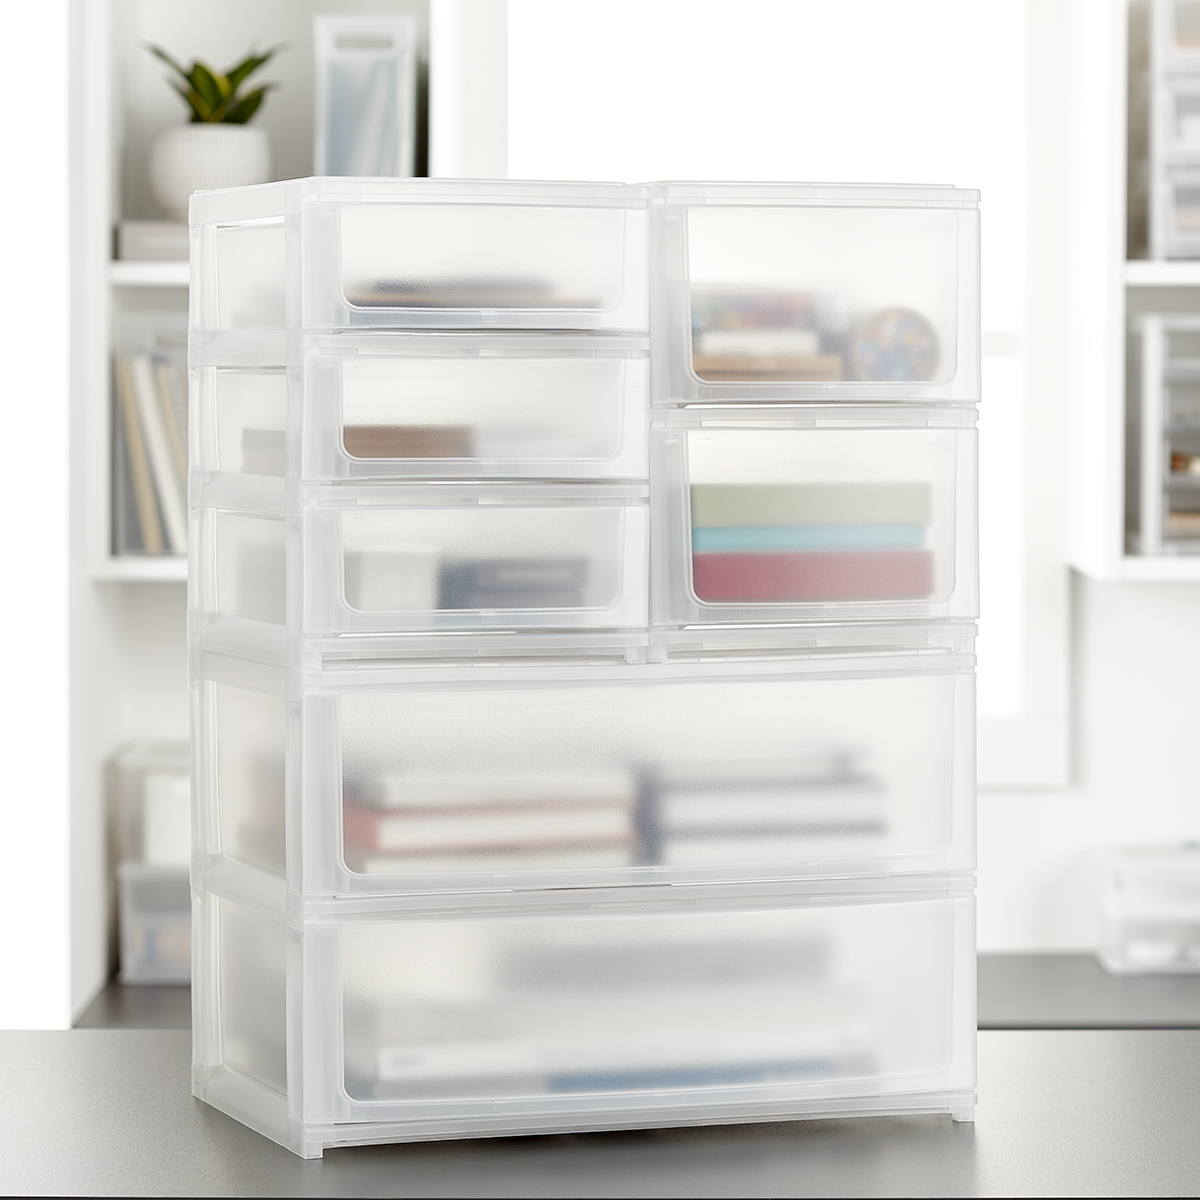 Shimo Stacking Organizers with Drawers | The Container Store